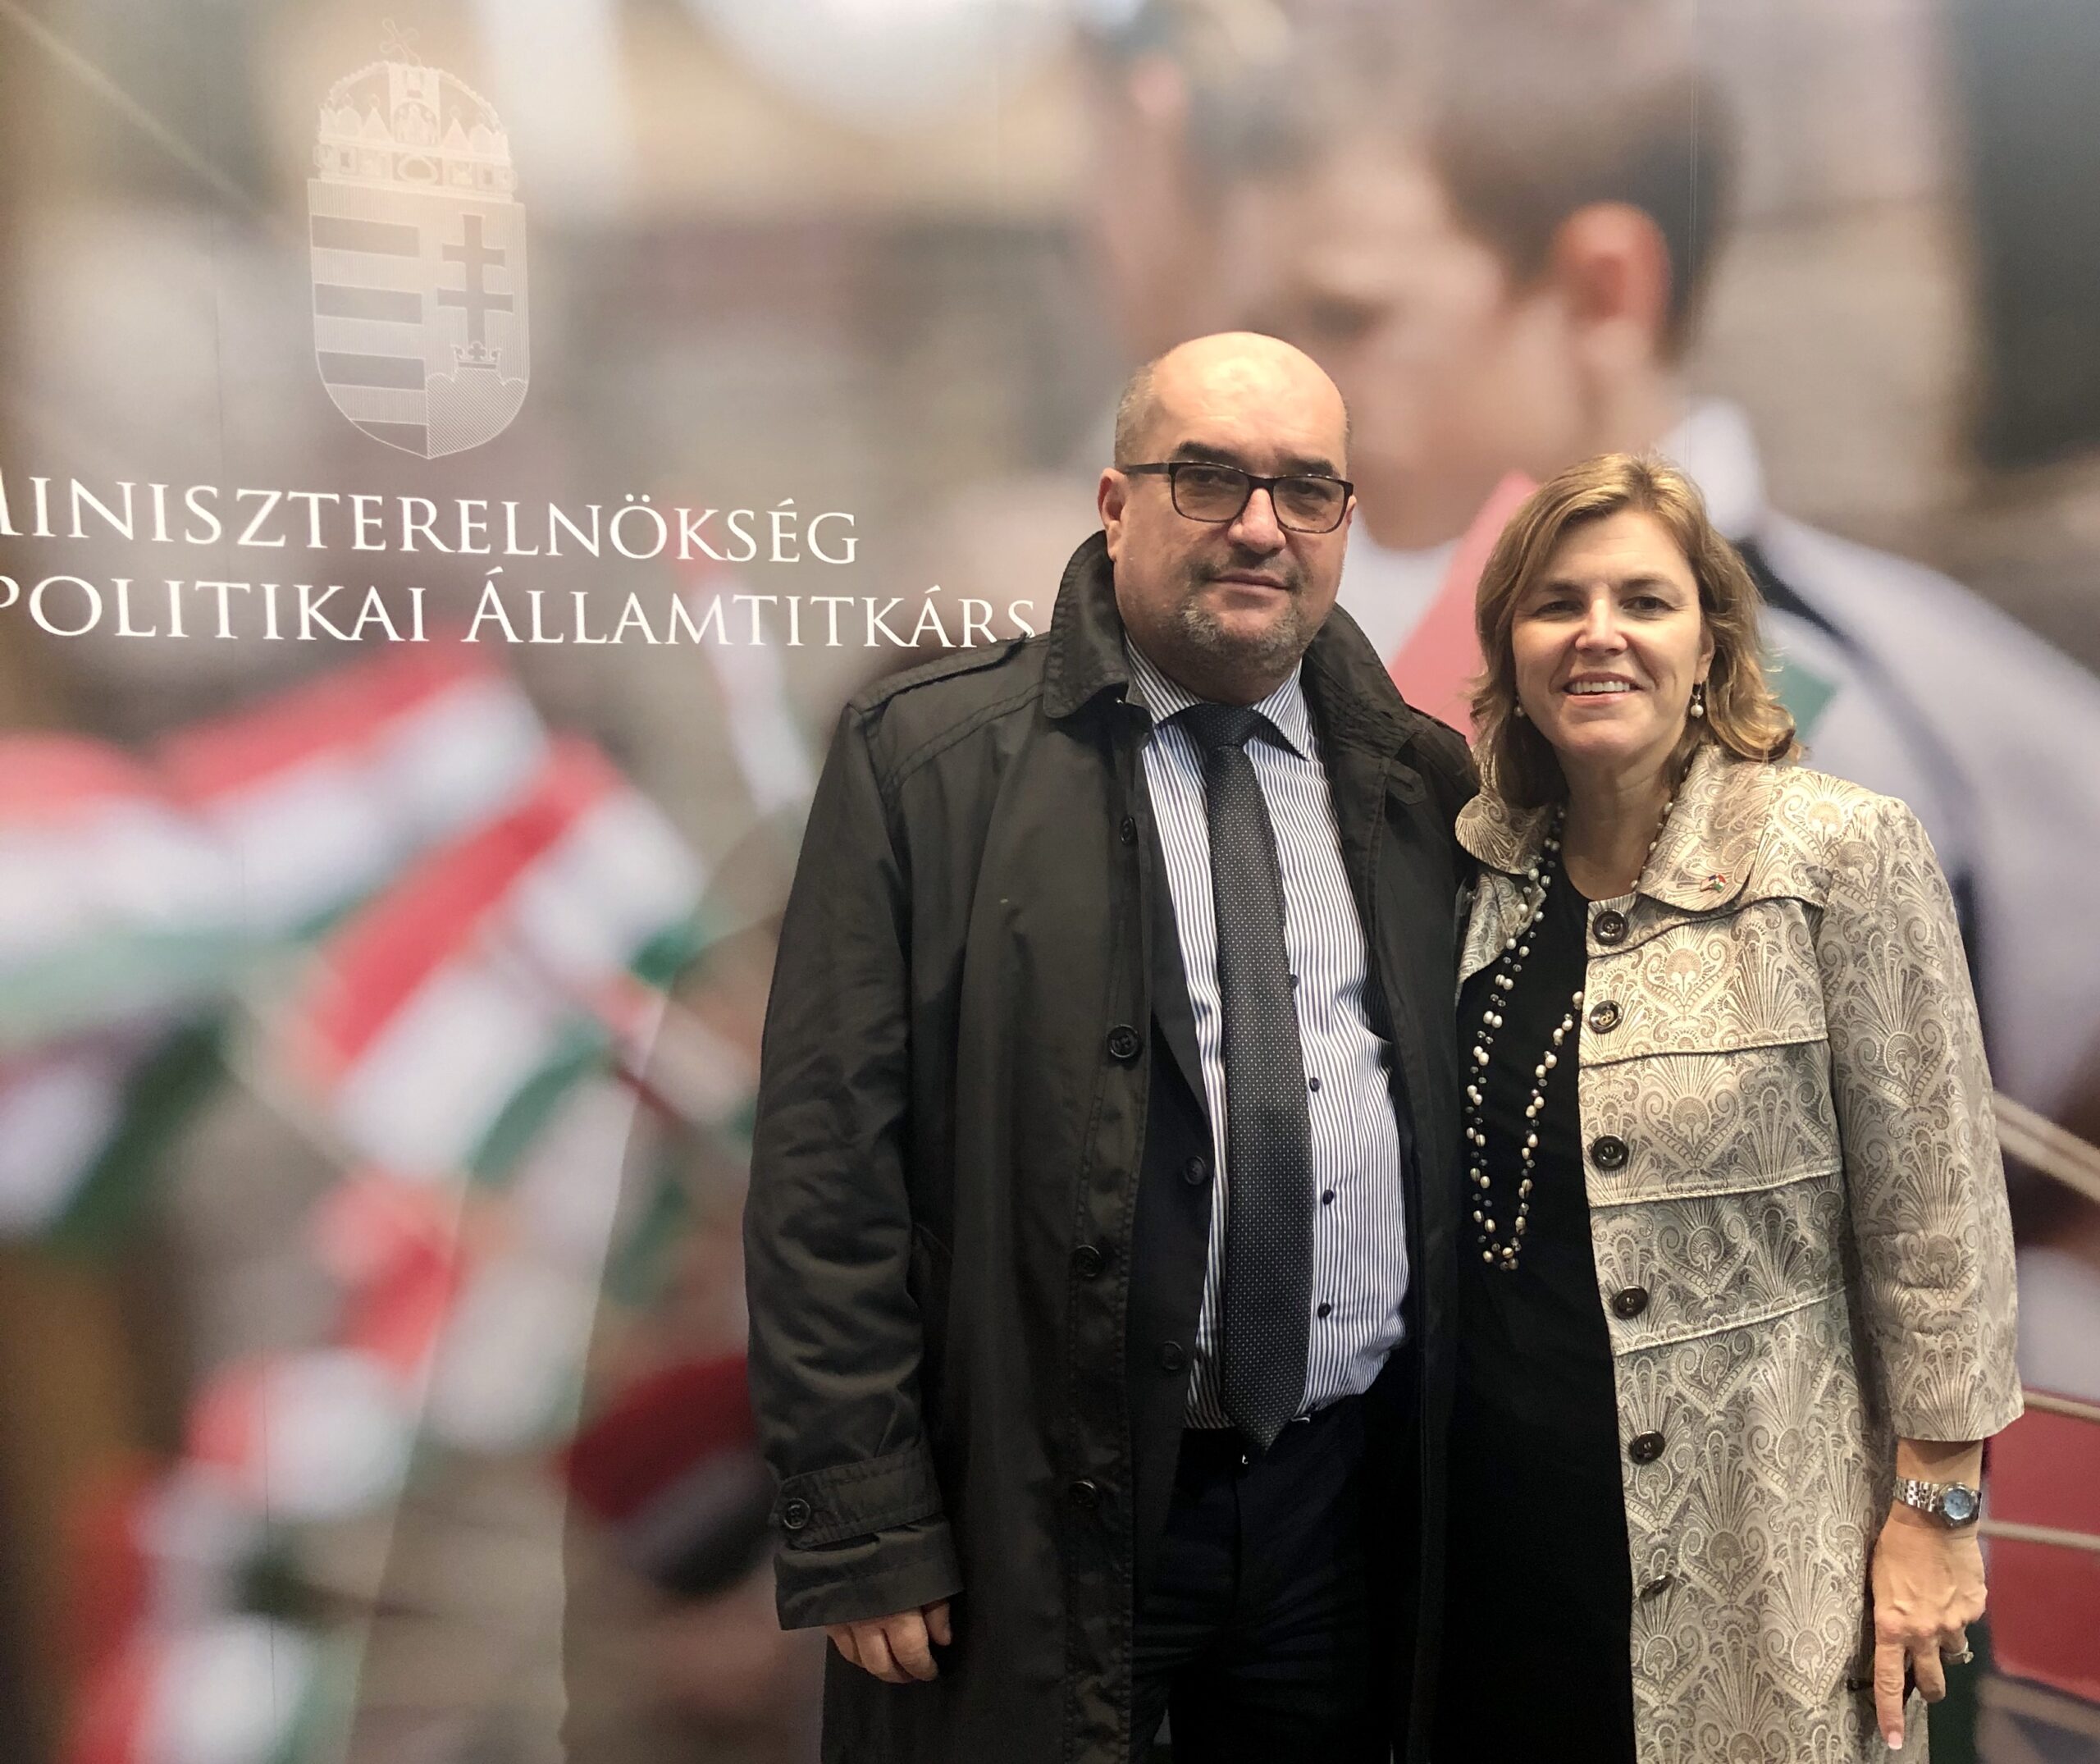 Coalition President Andrea Lauer Rice with Dr. László Brenzovics at the Hungarian Standing Conference (MÁÉRT) in November 2019